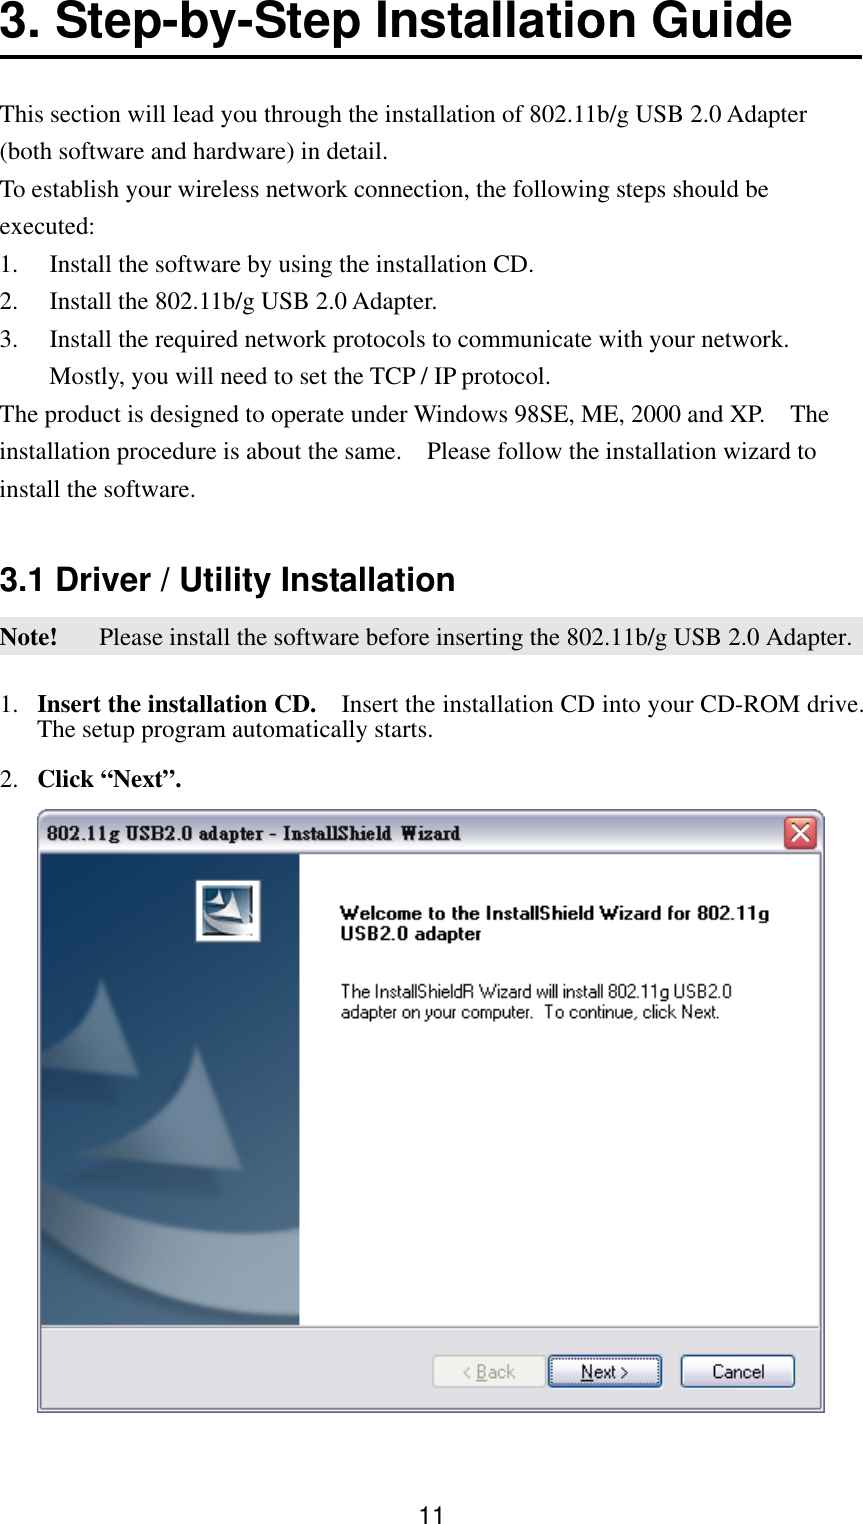  113. Step-by-Step Installation Guide    This section will lead you through the installation of 802.11b/g USB 2.0 Adapter (both software and hardware) in detail.   To establish your wireless network connection, the following steps should be executed: 1.  Install the software by using the installation CD. 2.  Install the 802.11b/g USB 2.0 Adapter. 3.  Install the required network protocols to communicate with your network.   Mostly, you will need to set the TCP / IP protocol. The product is designed to operate under Windows 98SE, ME, 2000 and XP.    The installation procedure is about the same.    Please follow the installation wizard to install the software.    3.1 Driver / Utility Installation Note!   Please install the software before inserting the 802.11b/g USB 2.0 Adapter. 1.  Insert the installation CD.    Insert the installation CD into your CD-ROM drive.   The setup program automatically starts. 2.  Click “Next”.  